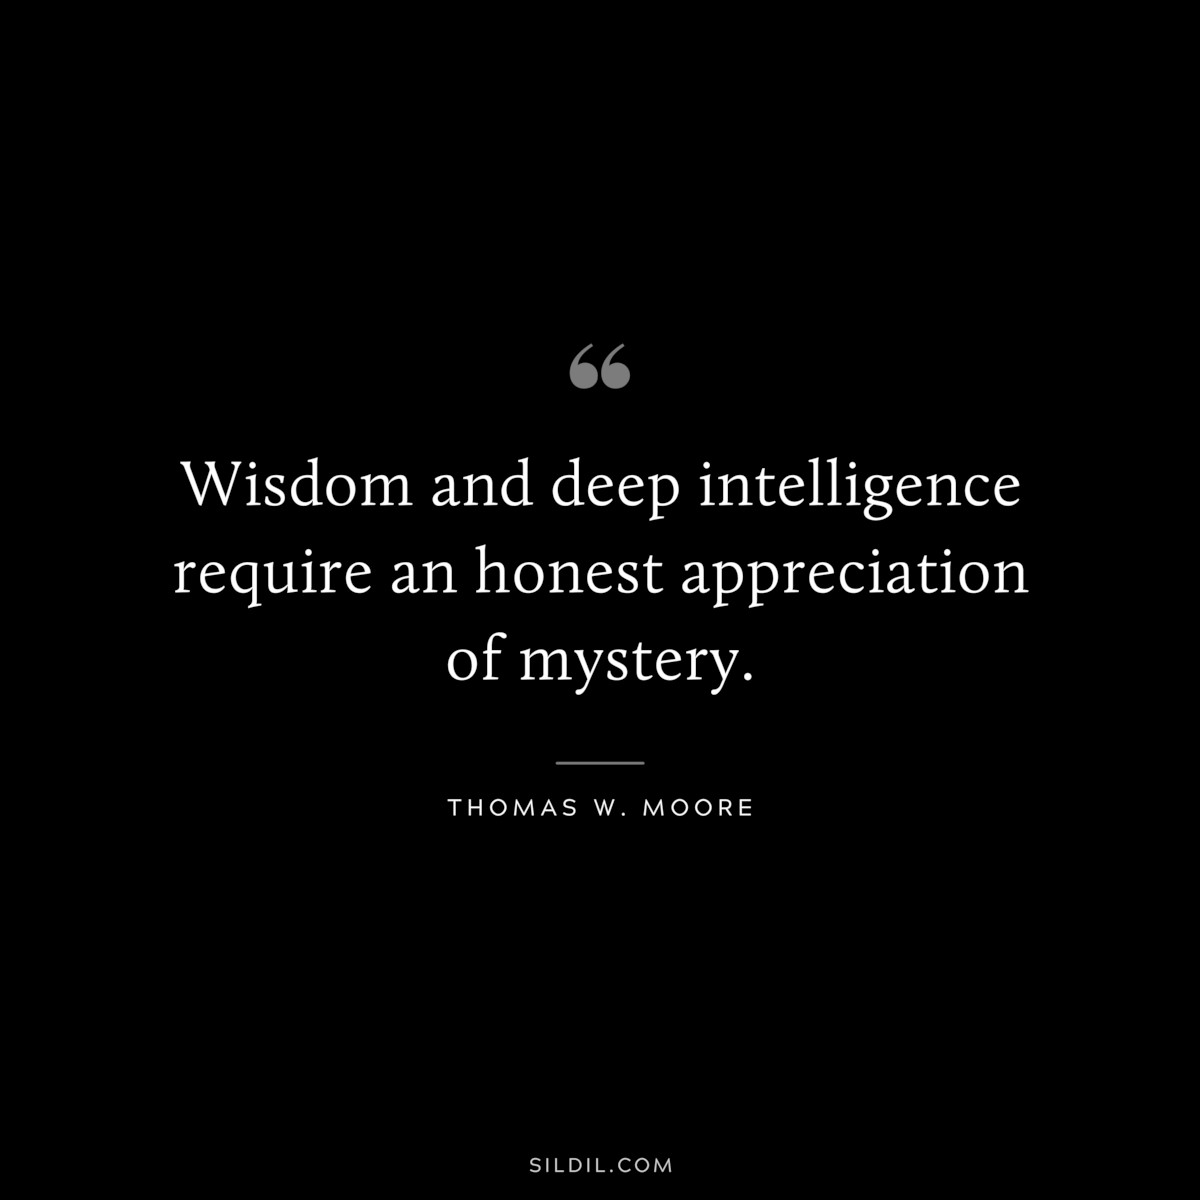 Wisdom and deep intelligence require an honest appreciation of mystery. ― Thomas W. Moore